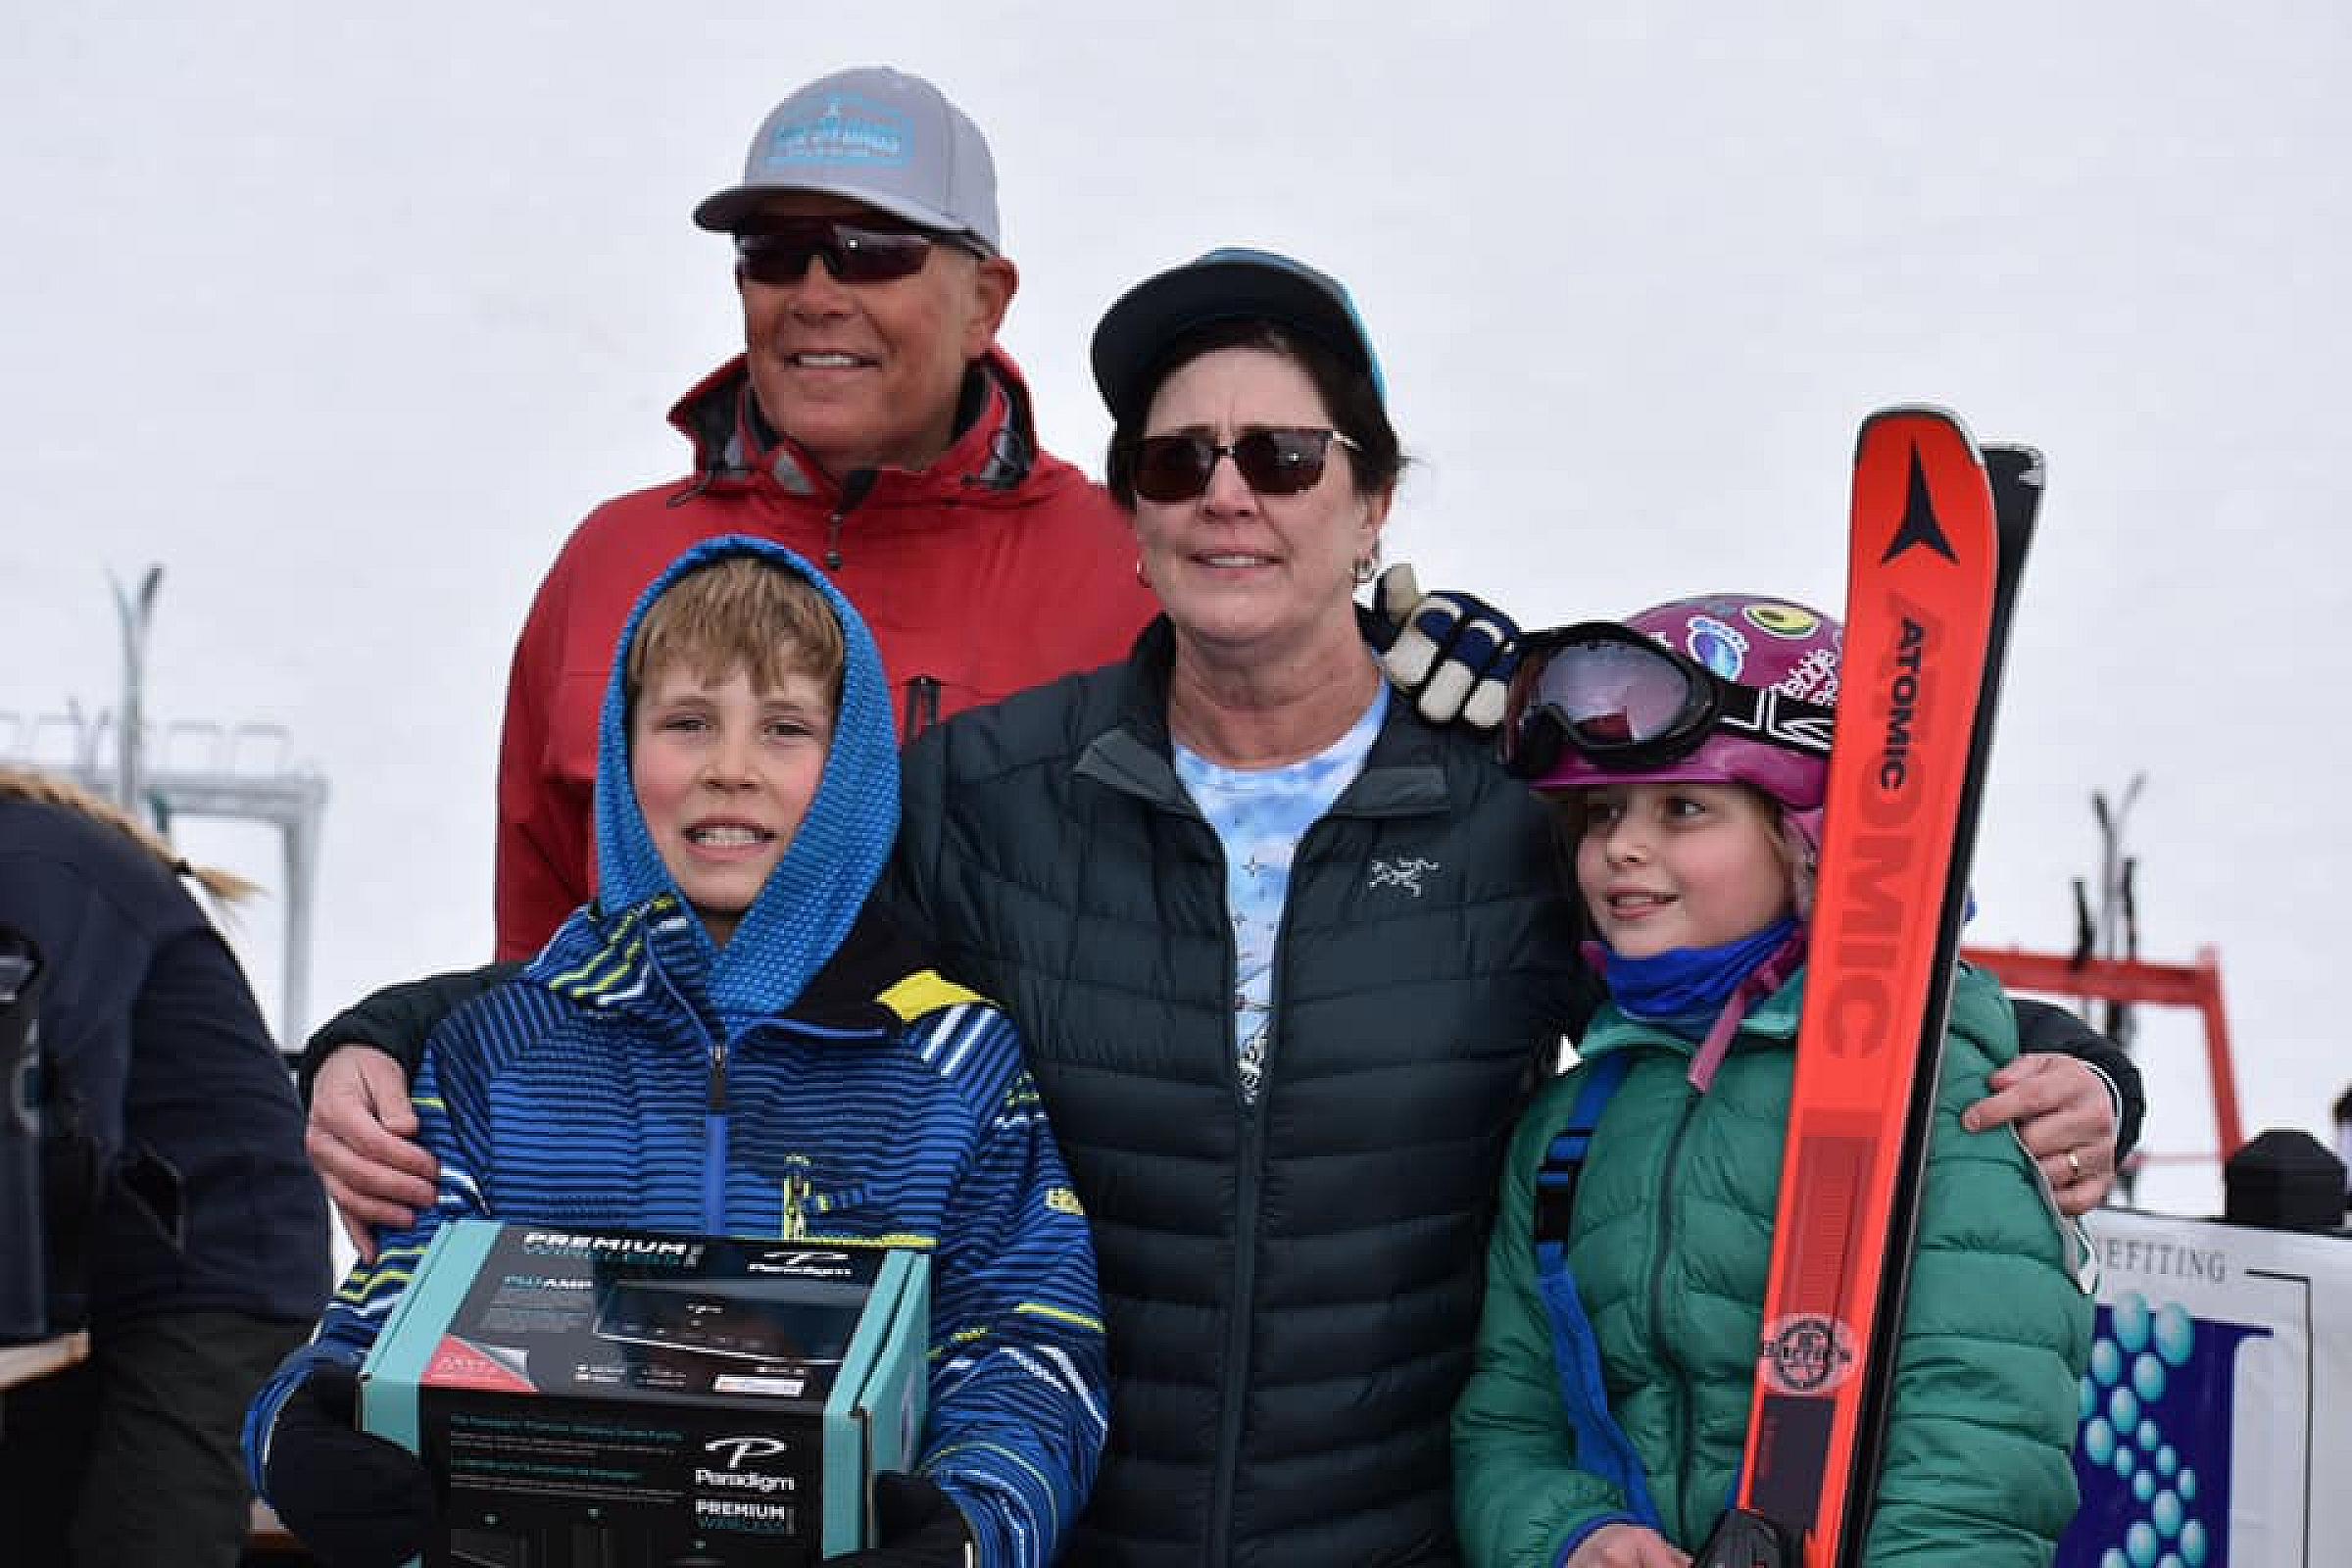 Zach and Tami Parris with prize winners during the 2021 Ride on Dads event at Pebble Creek Ski Area